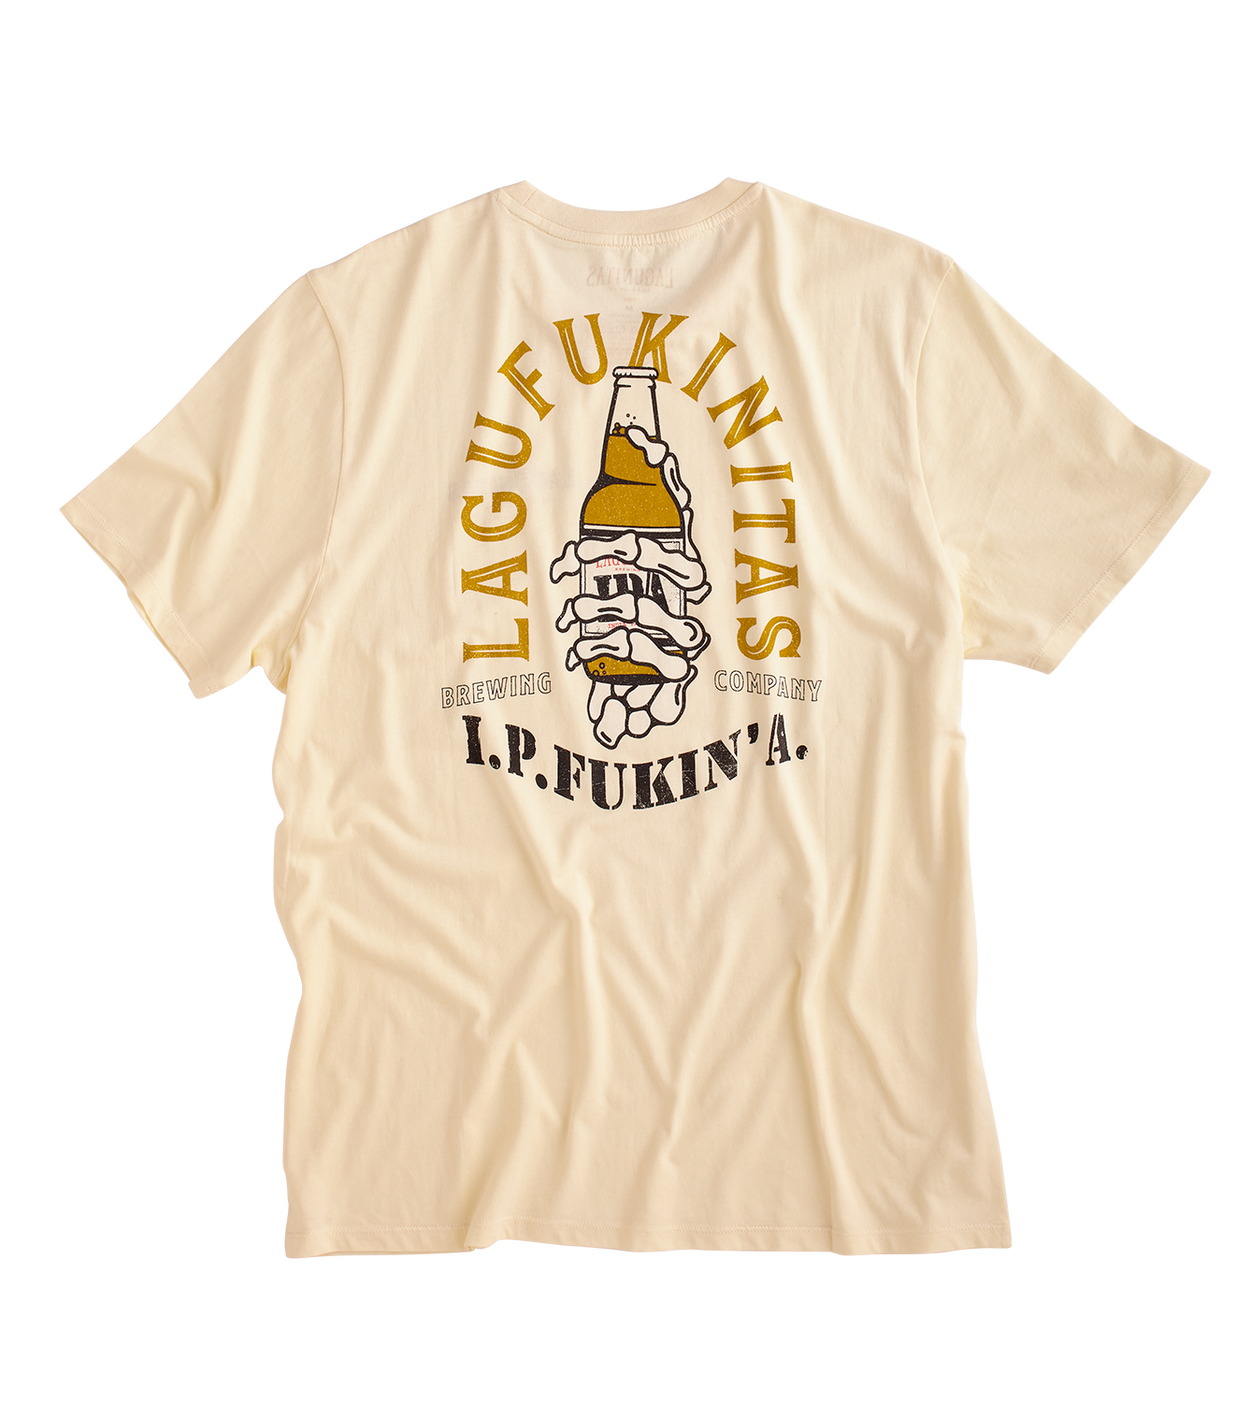 “A unique craft beer-inspired shirt with a bold design and Lagunitas branding. Made from premium quality cotton, it offers a comfortable and stylish fit. Perfect for beer enthusiasts and casual fashion”